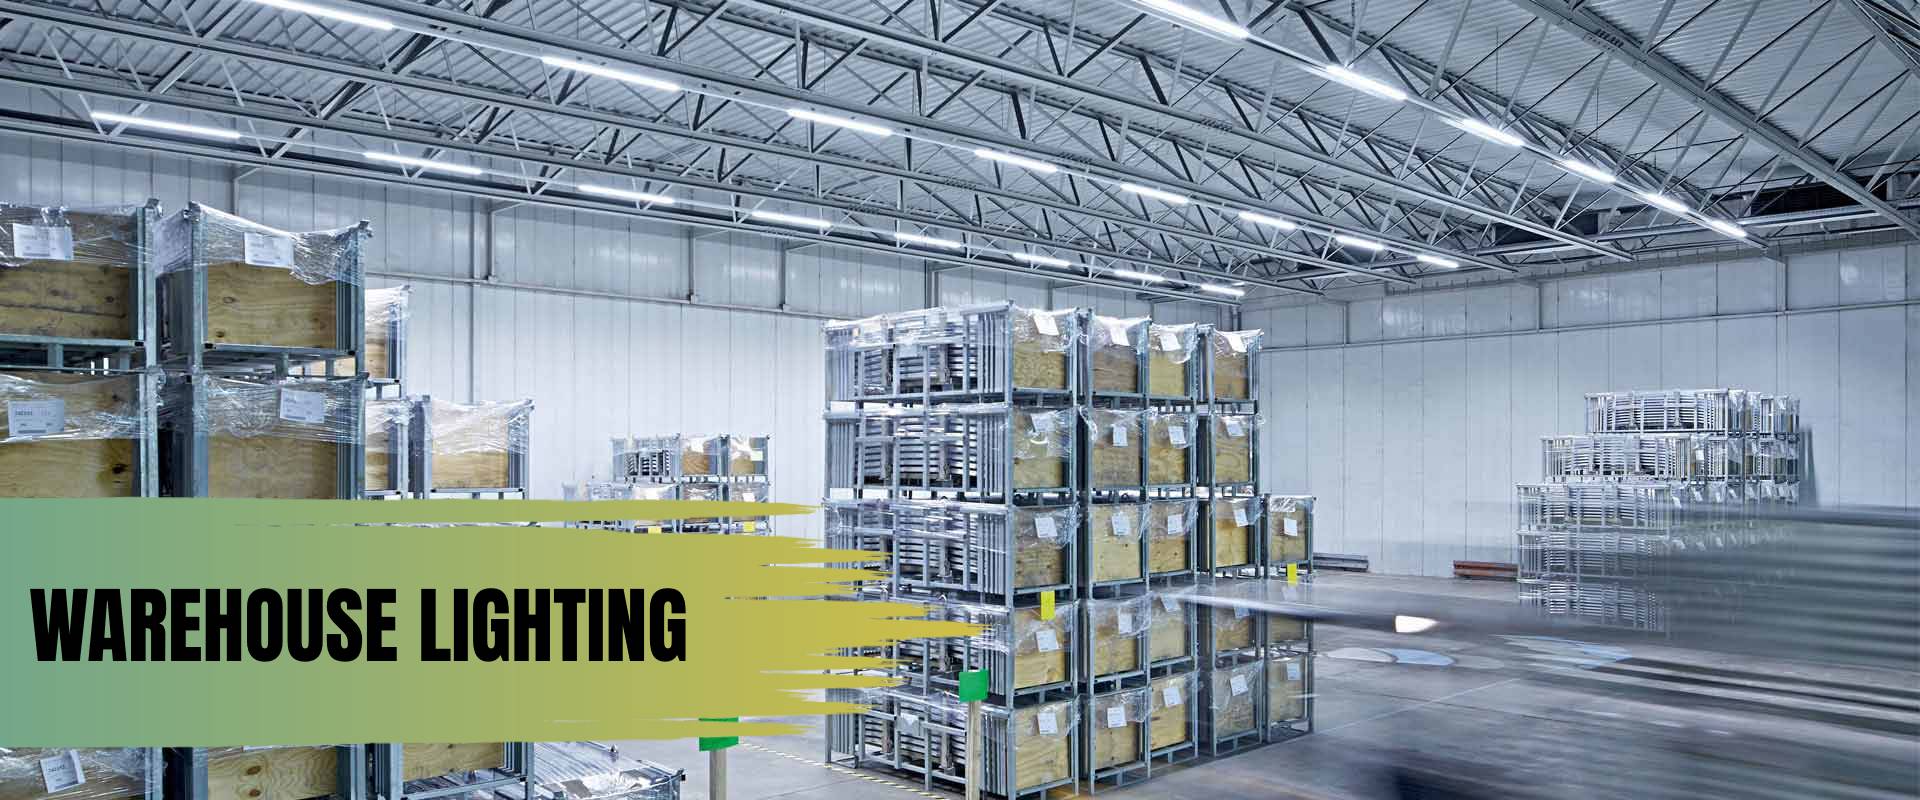 Warehouse Lighting – A Guide to Properly Illuminating Your Warehouse